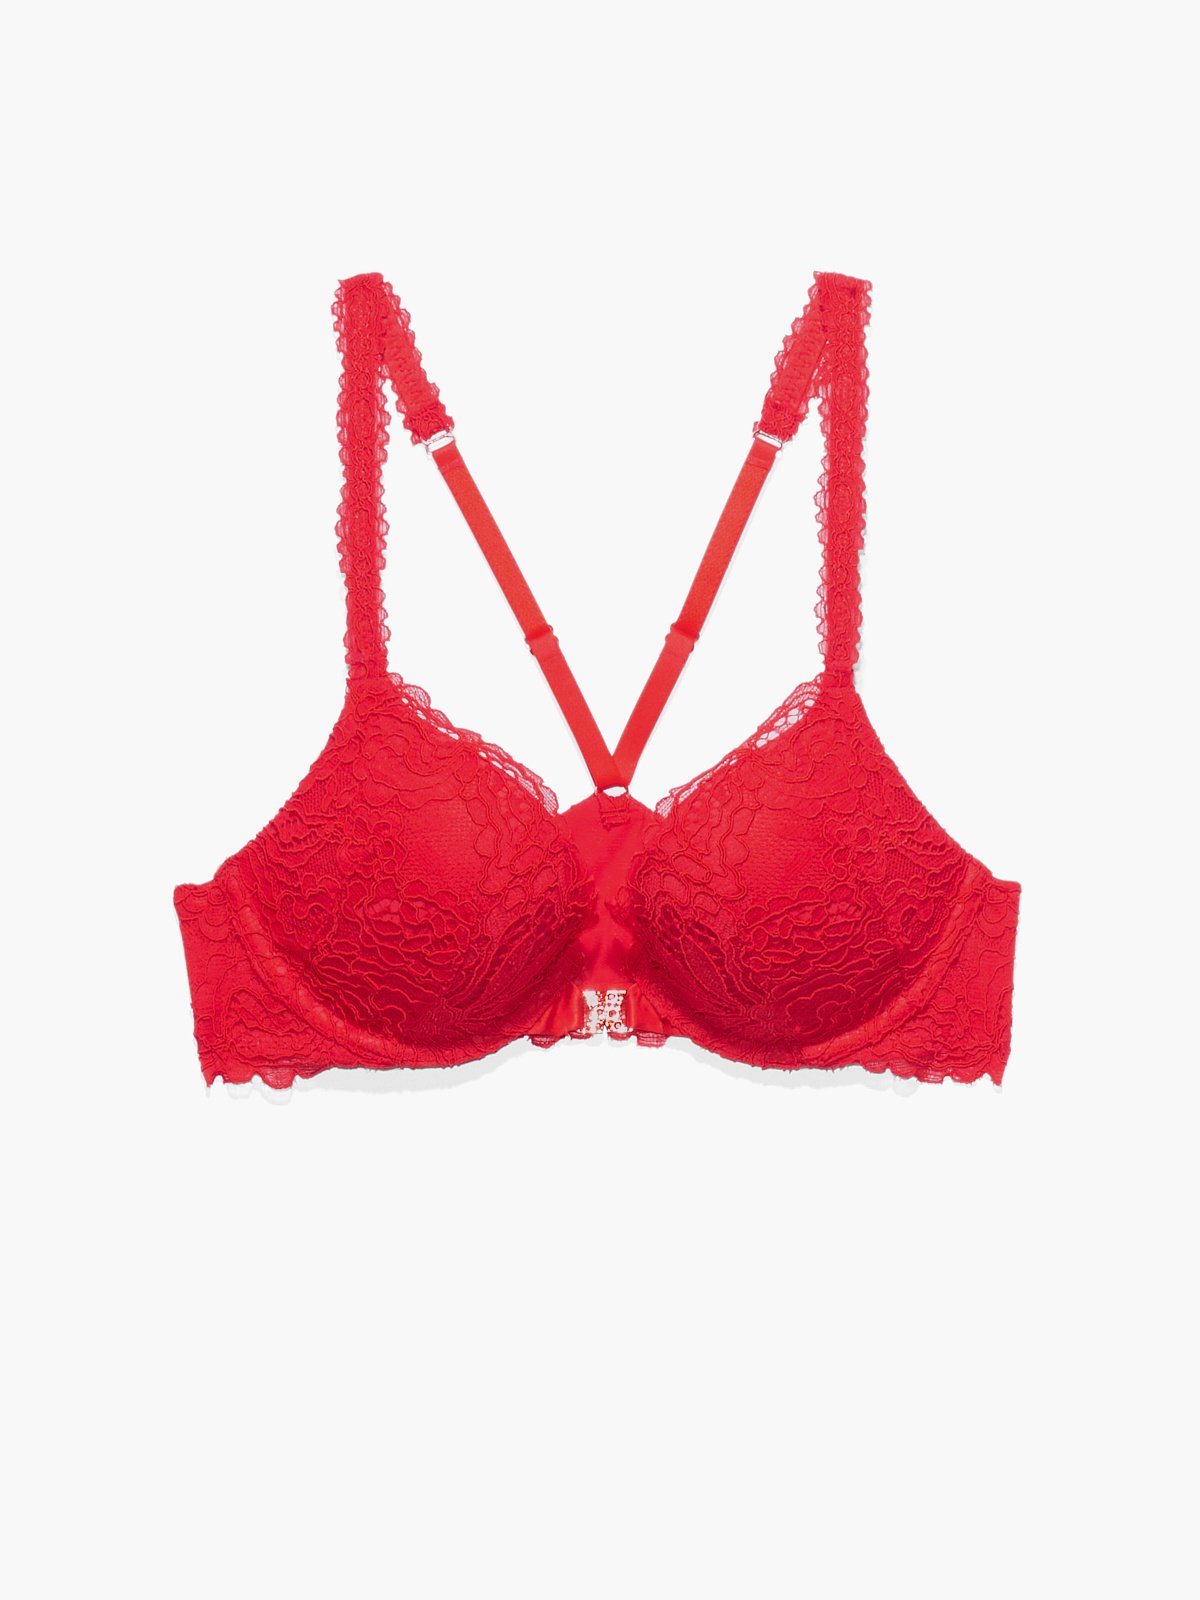 Romantic Corded Lace Push-Up Bra in Red